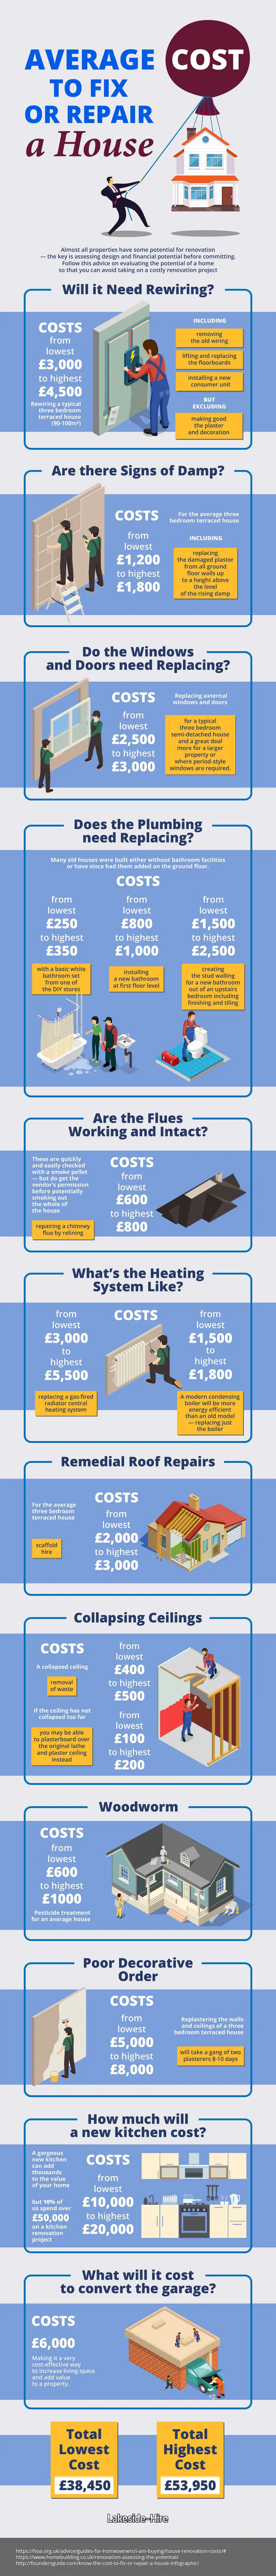 Lakeside hire infographic- cost of building a house